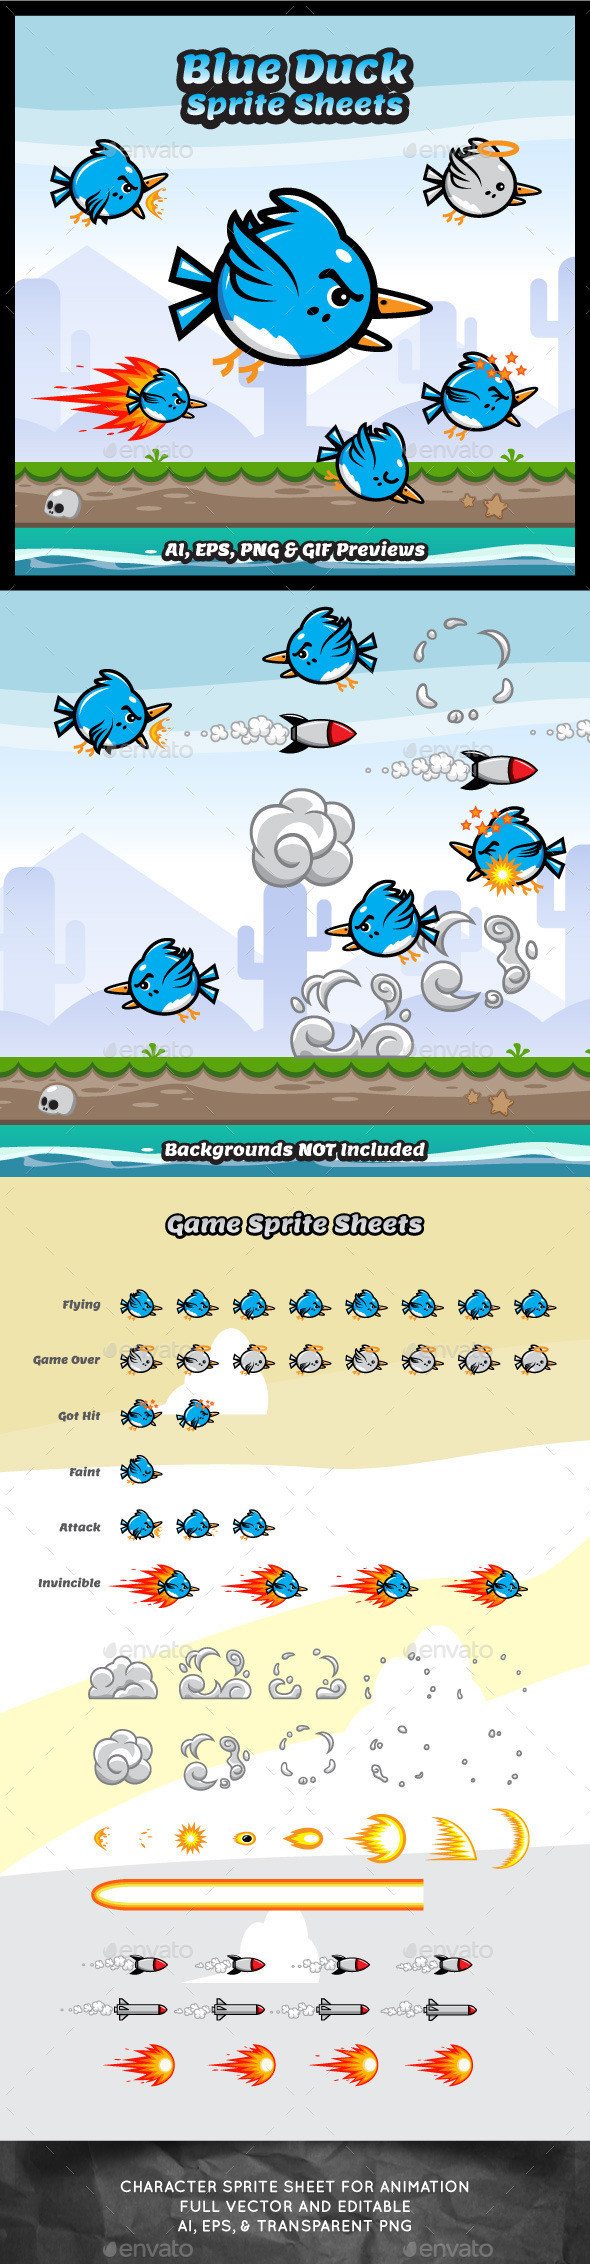 Flappy duck angry duck flying duck game character sprite sheet sidescroller game asset flying flappy animation gui mobile games gameart game art 590